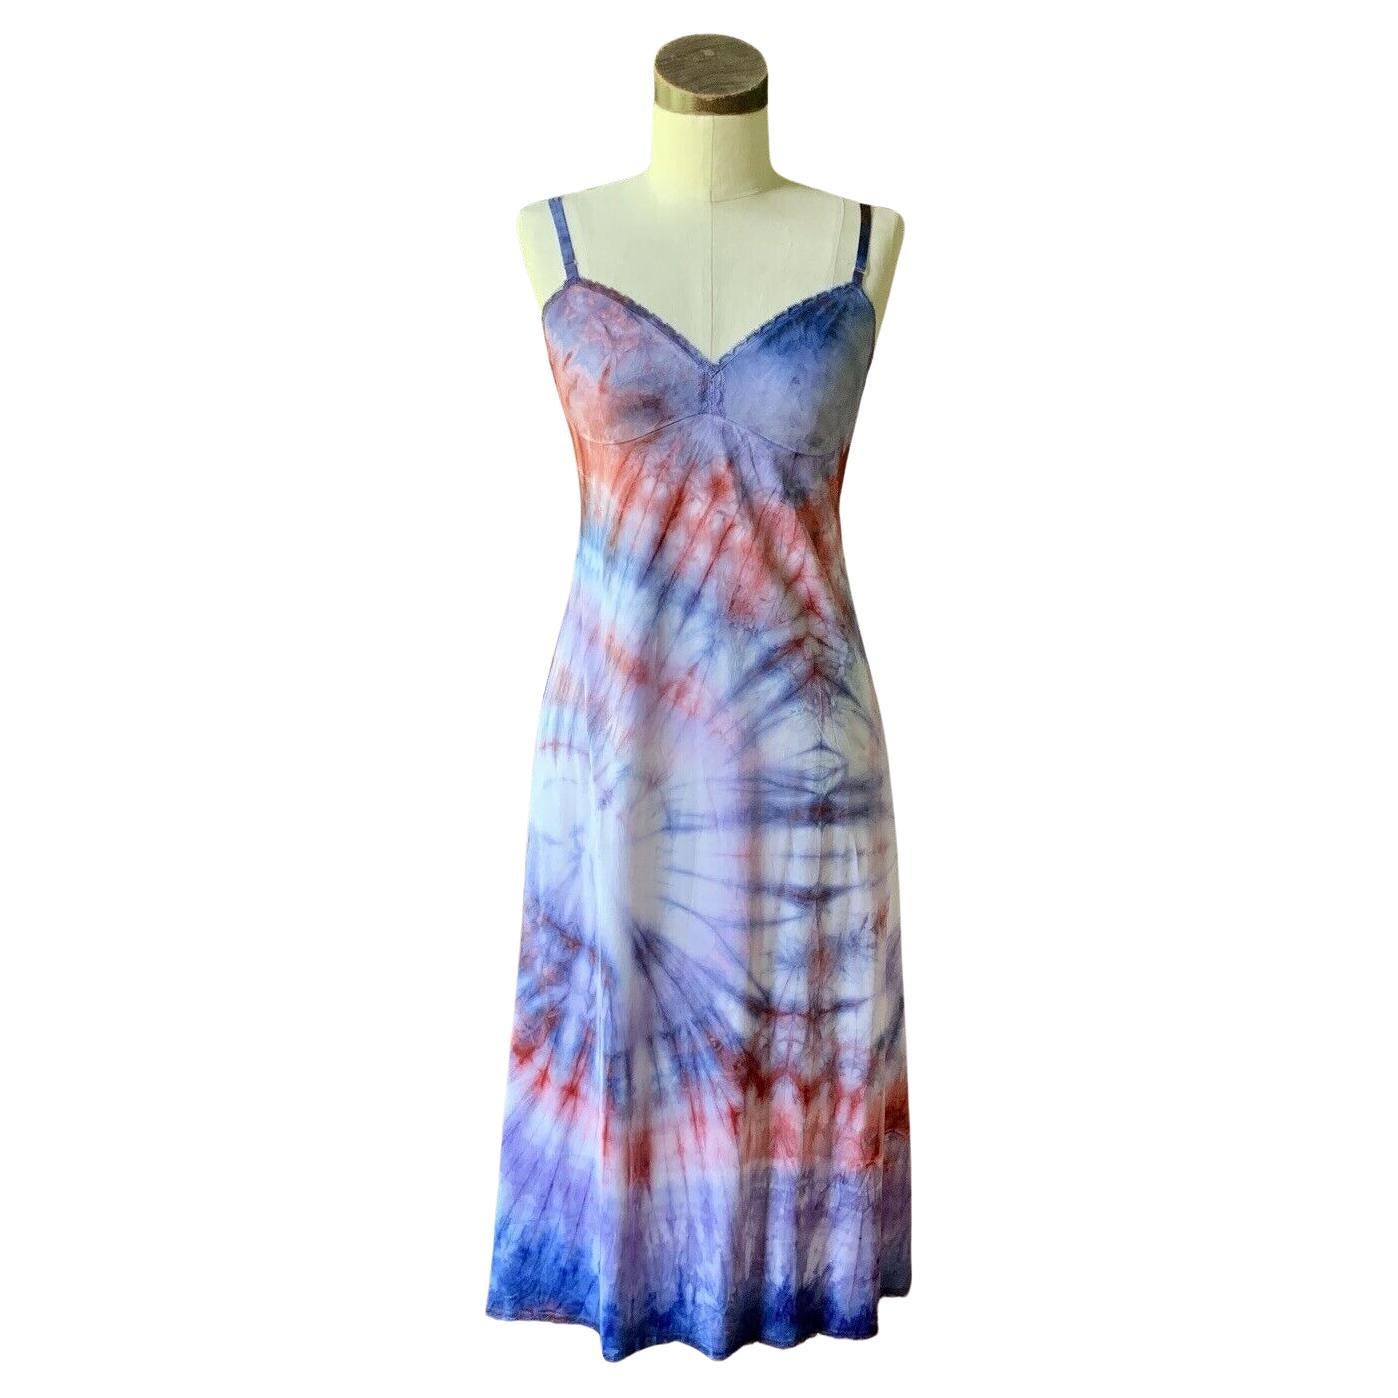 DYED PETALS Vintage Hand Botanically Dyed Tie-Dyed Slip Dress XS/S 32 For Sale